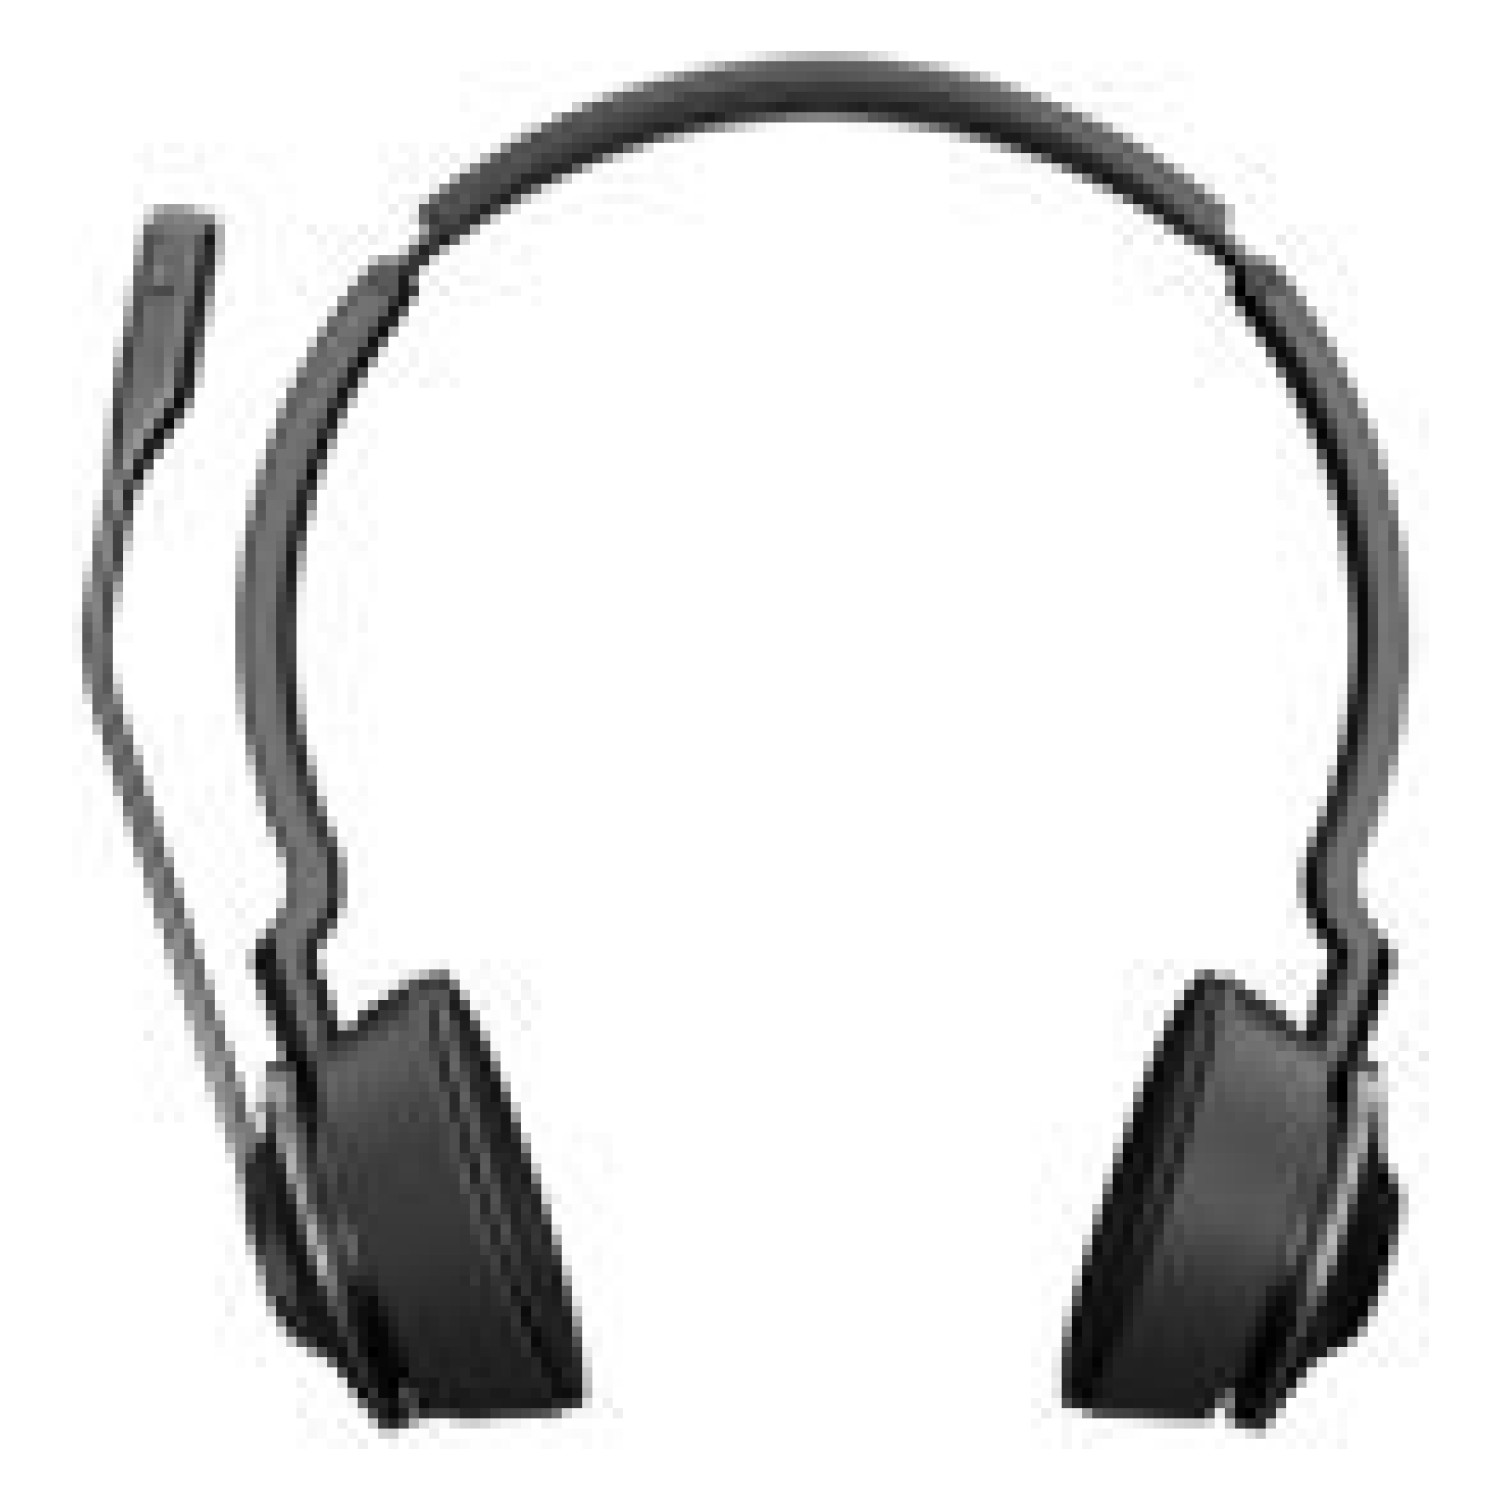 JABRA Engage Headset Stereo HS only